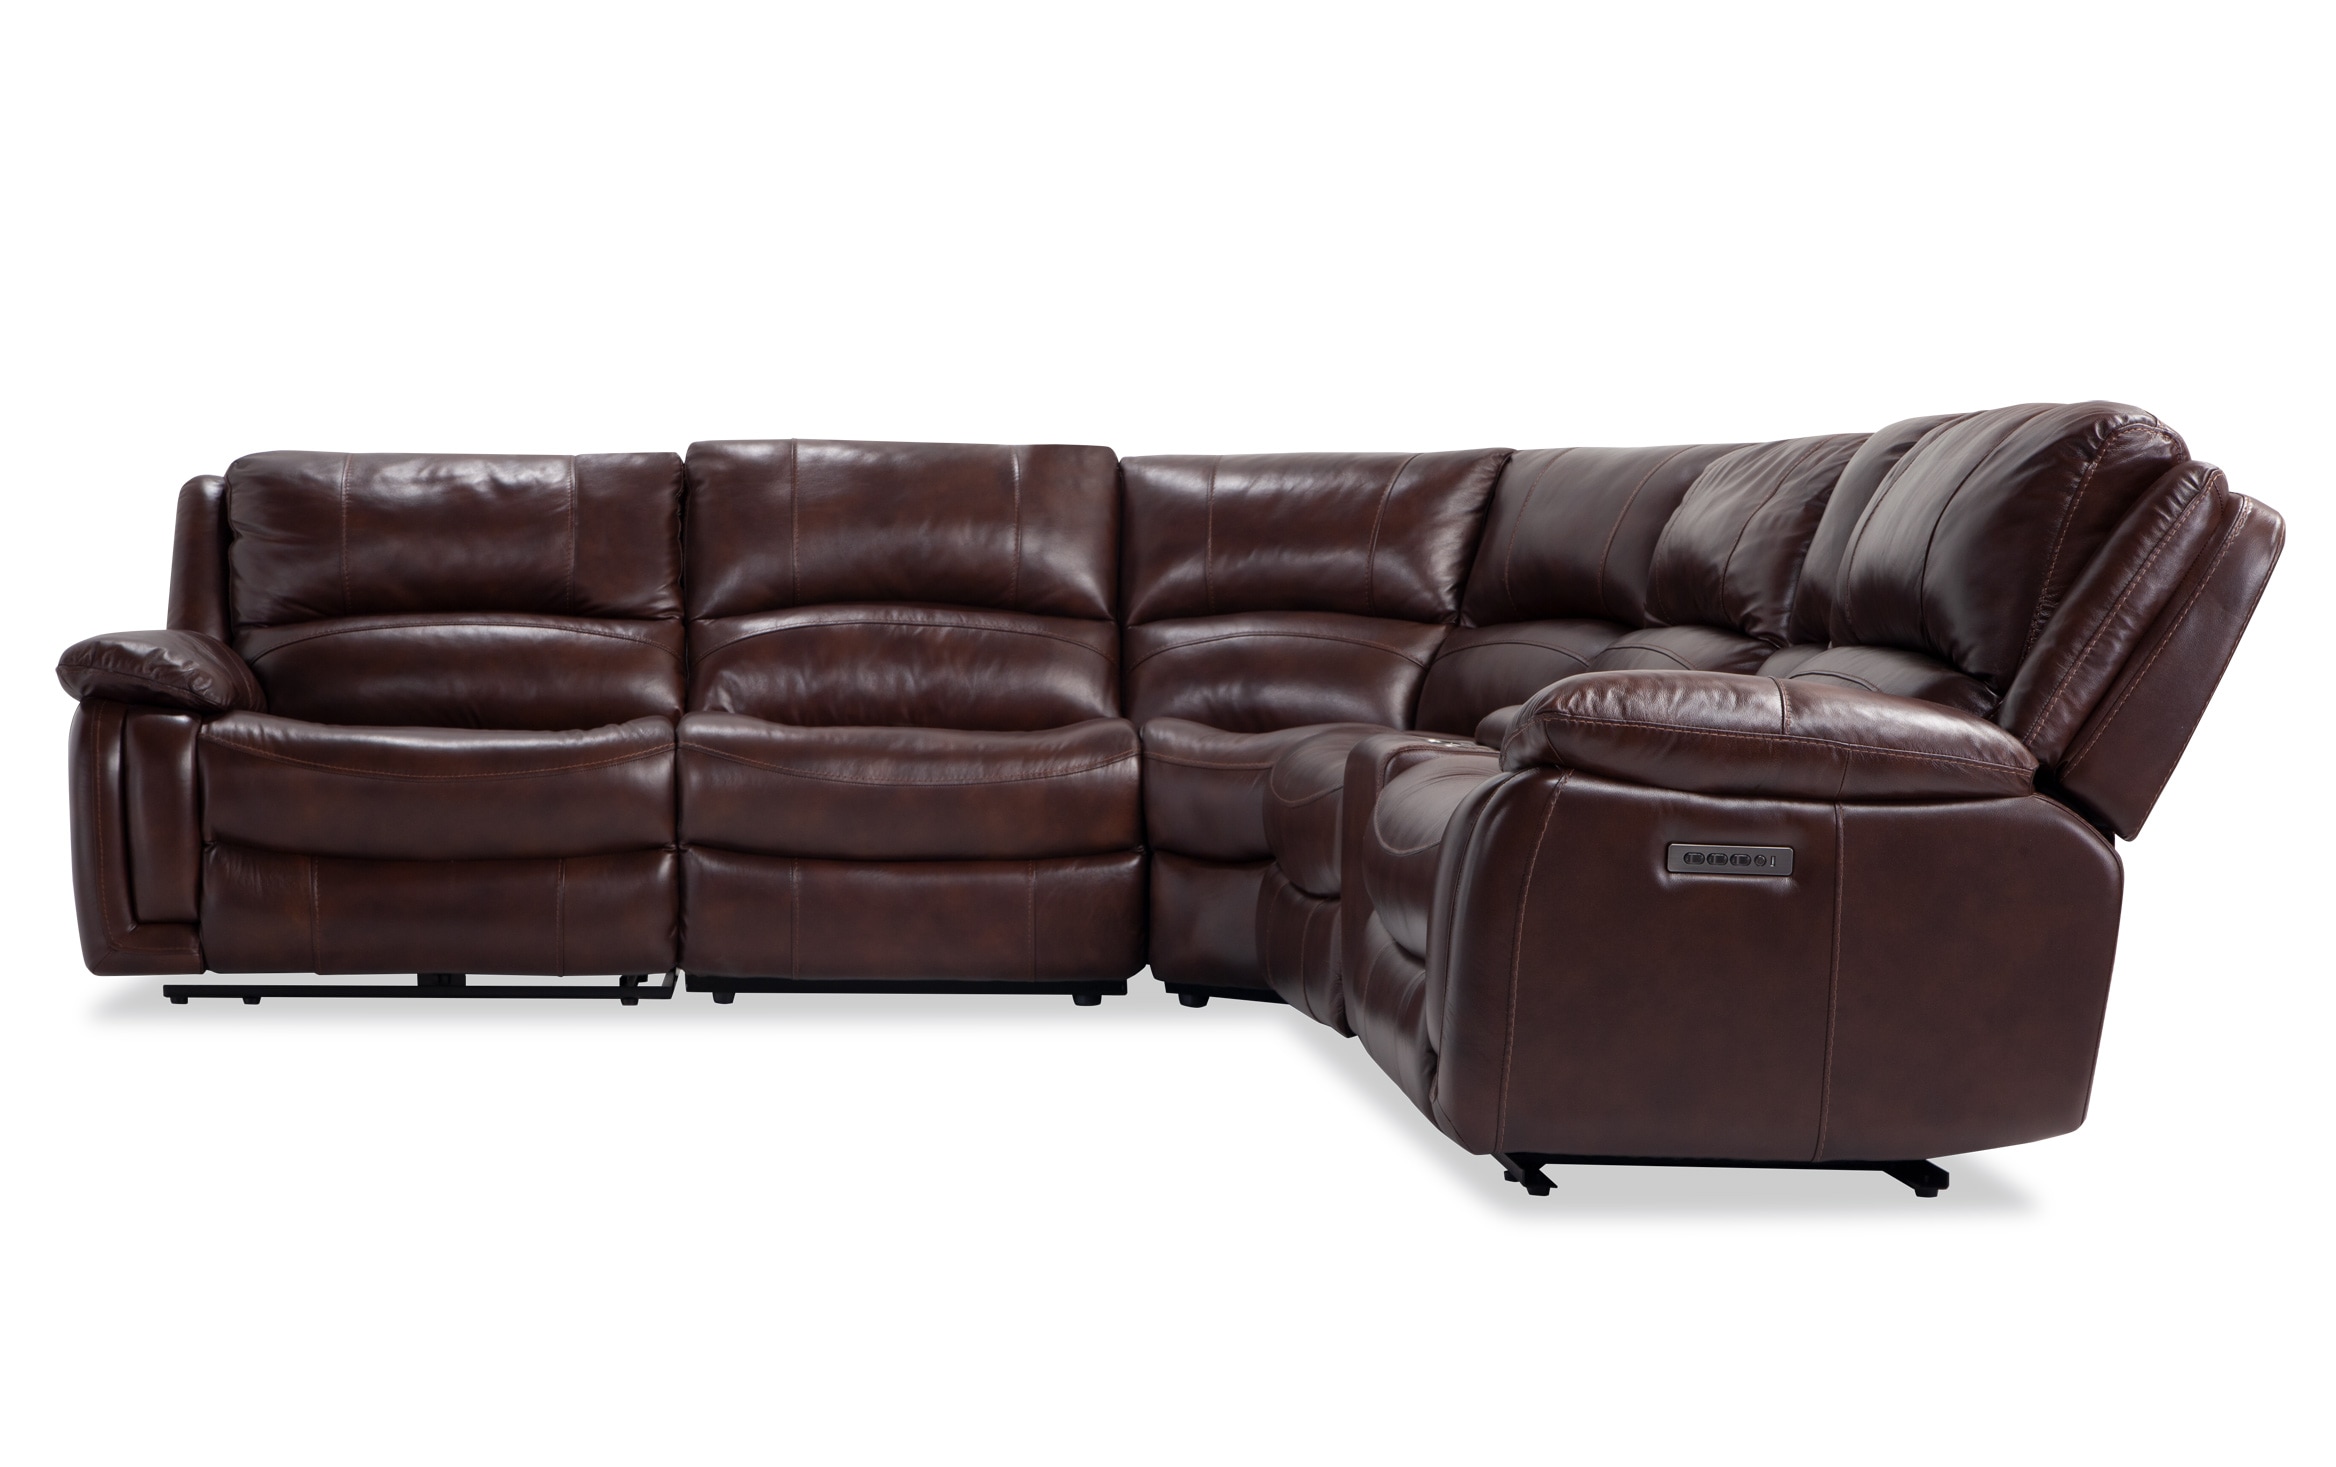 6 Piece Power Reclining Sectional, Sectional Leather Couch